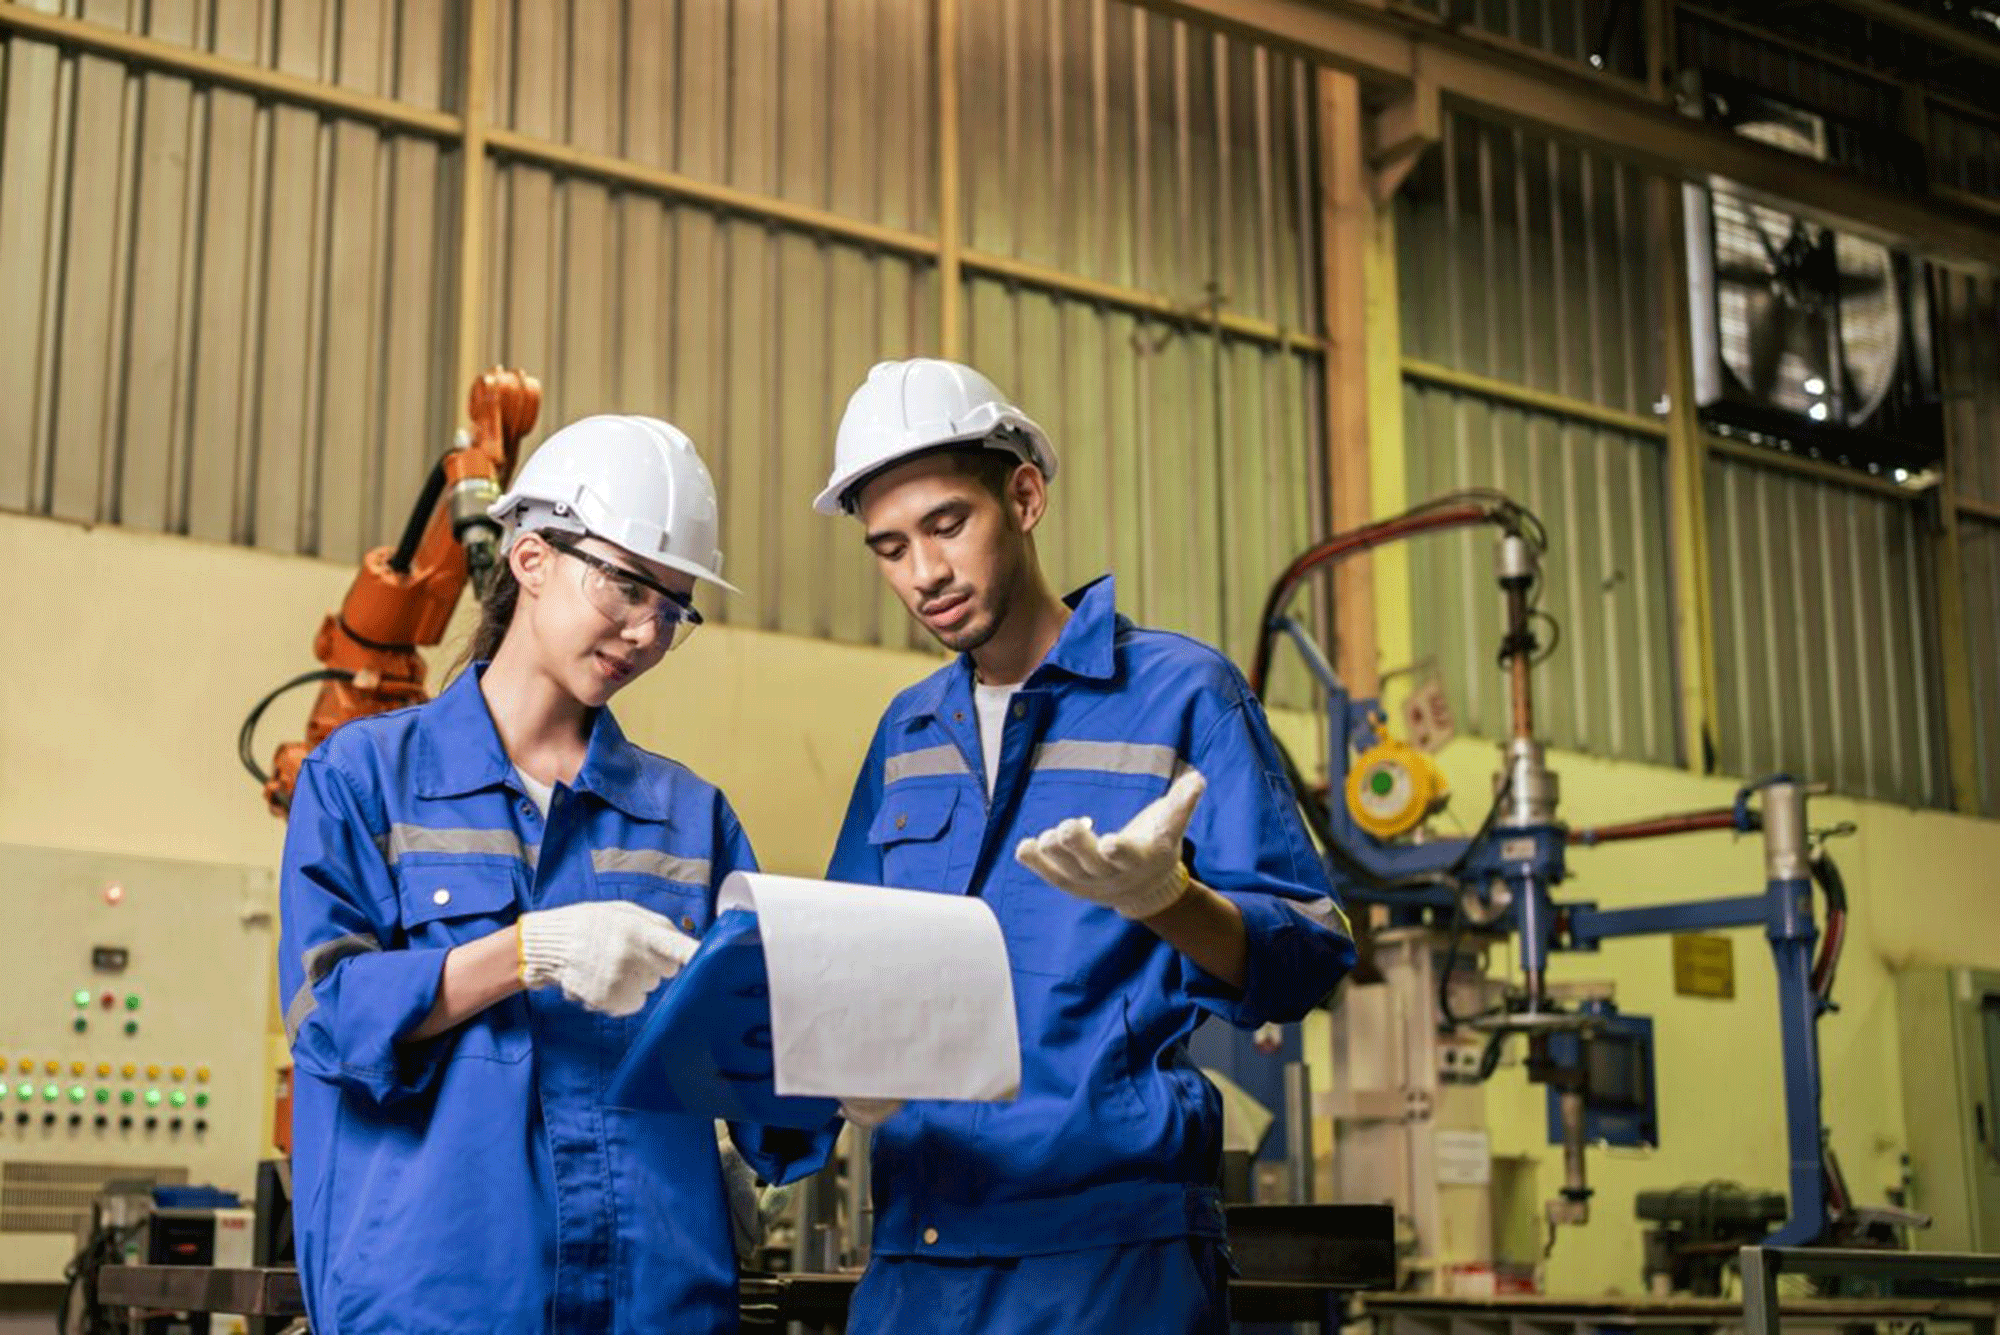 Asian male and female industrial worker working in manufacturing plant.